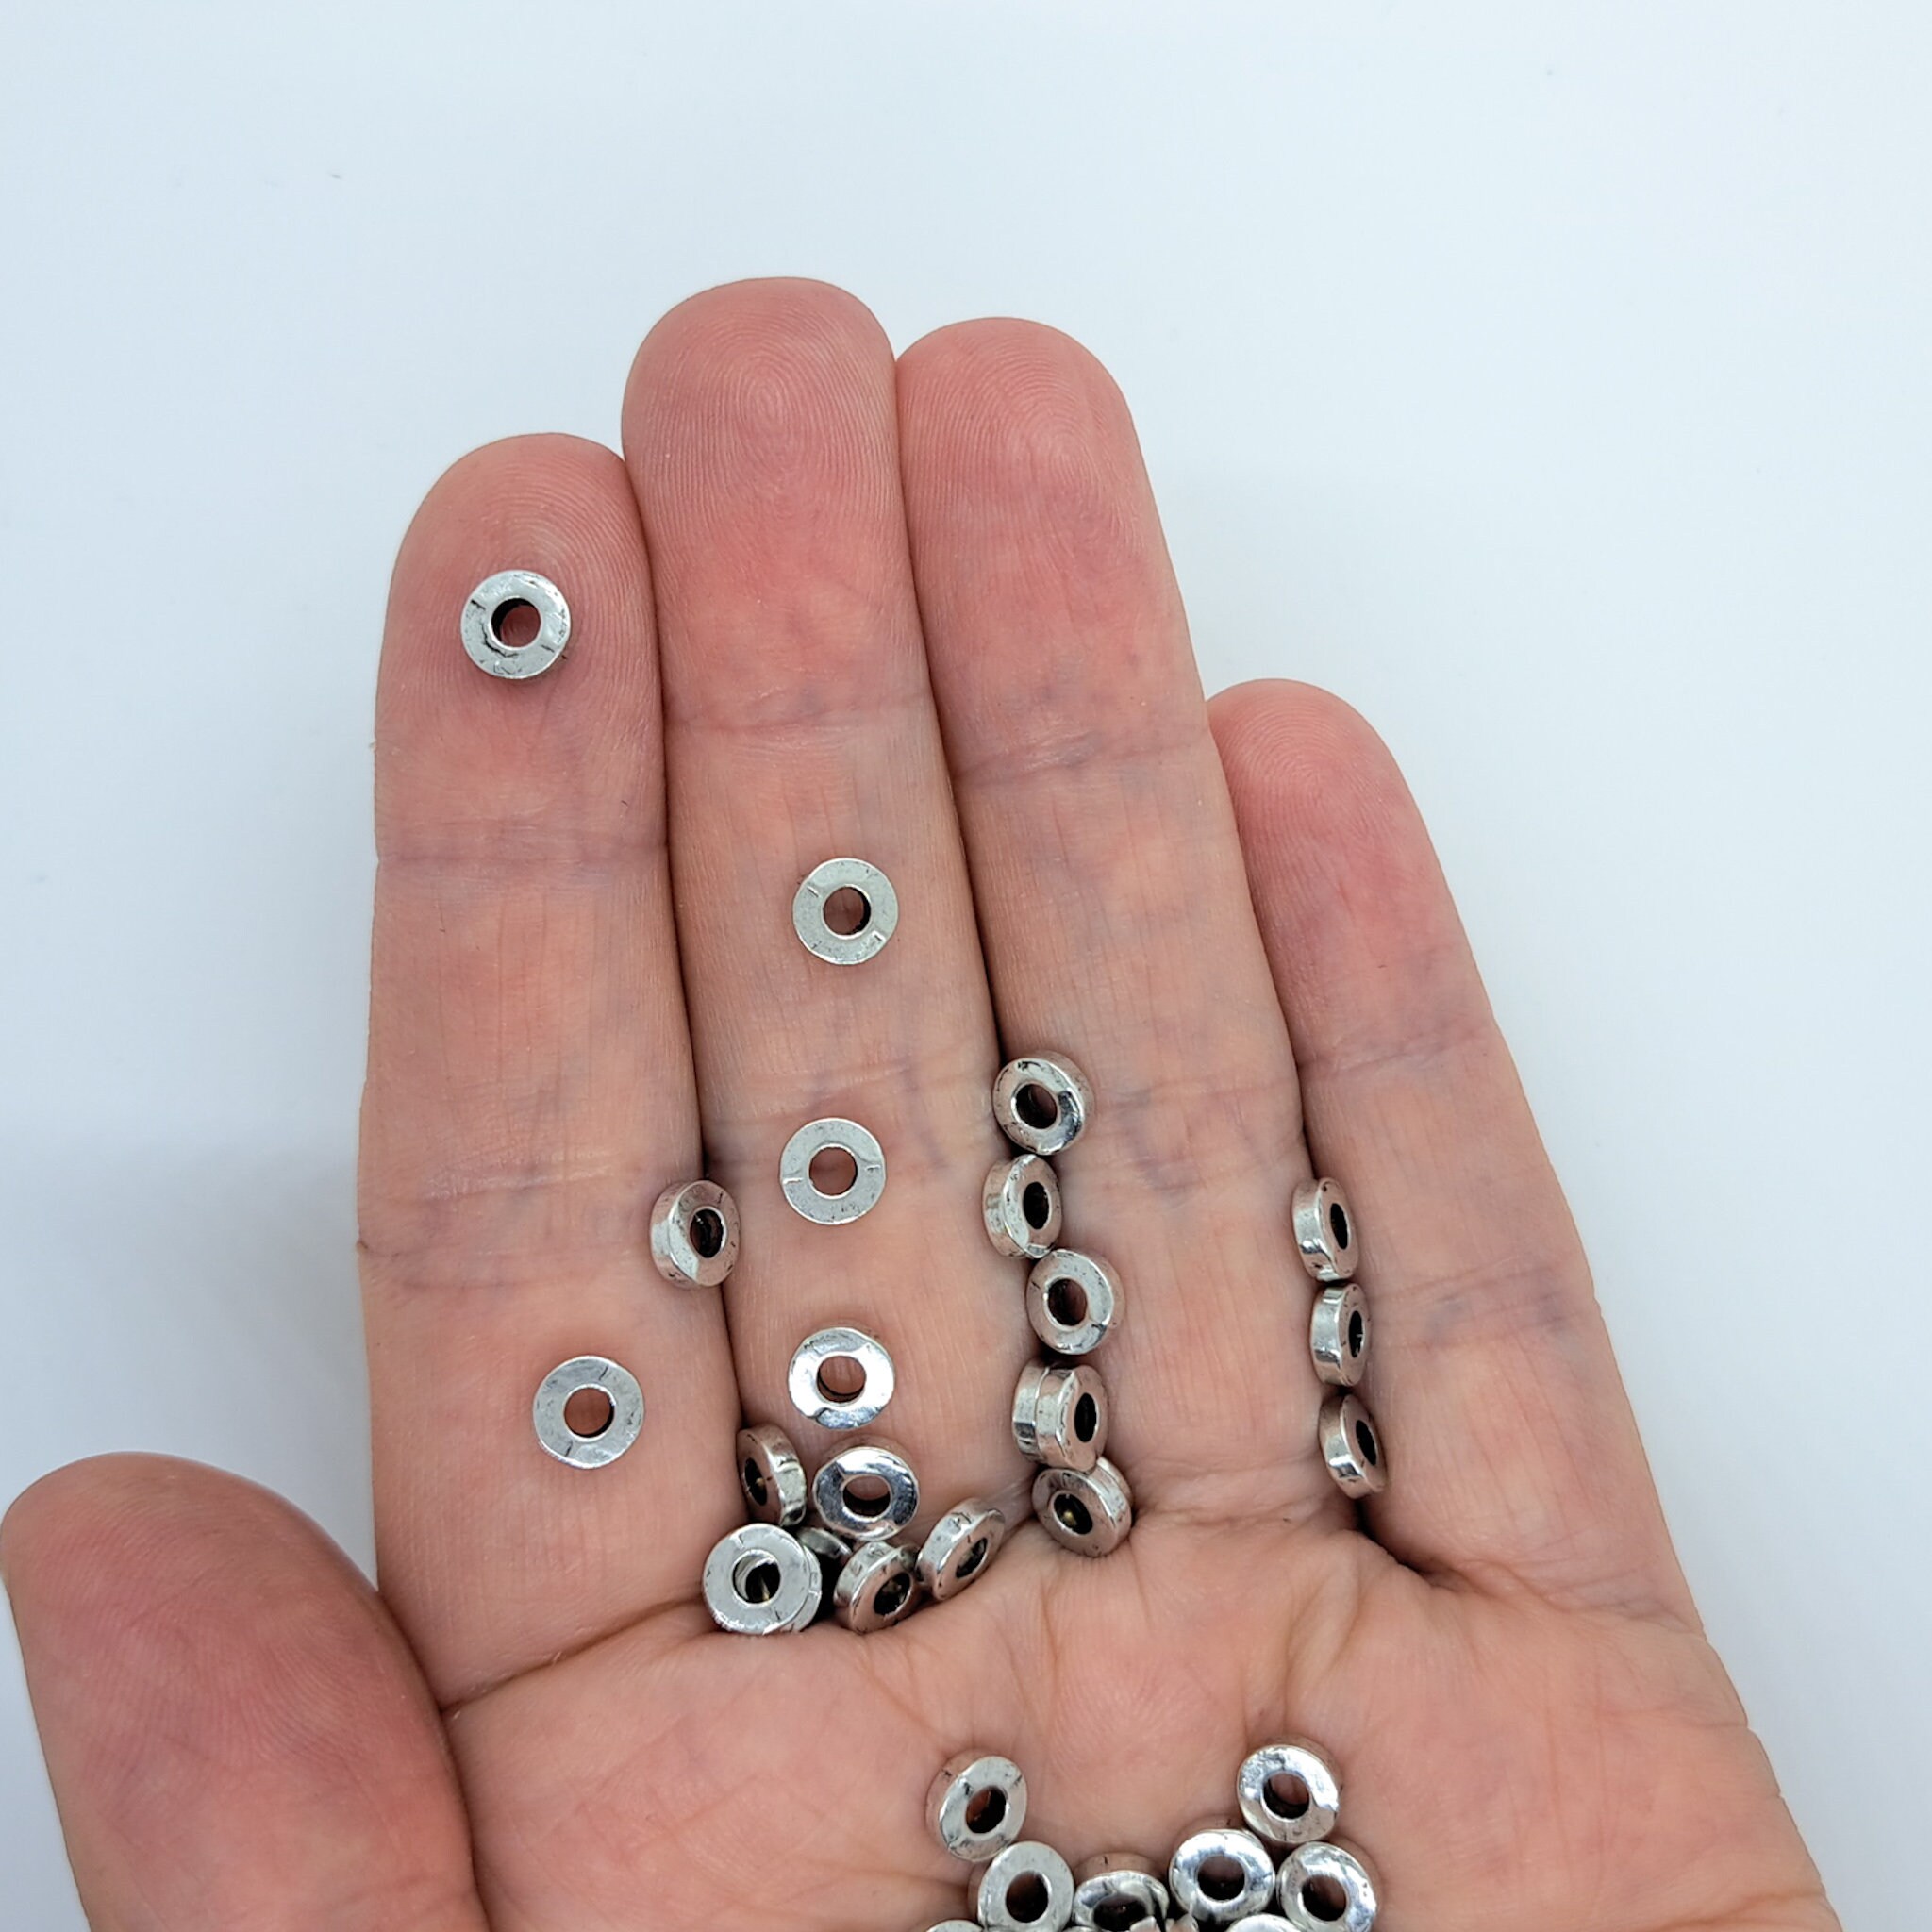 Coin Beads, Round Flat Bead, Small Hole Spacers, Silver Saucer Bead, MiniatureSweet, Kawaii Resin Crafts, Decoden Cabochons Supplies